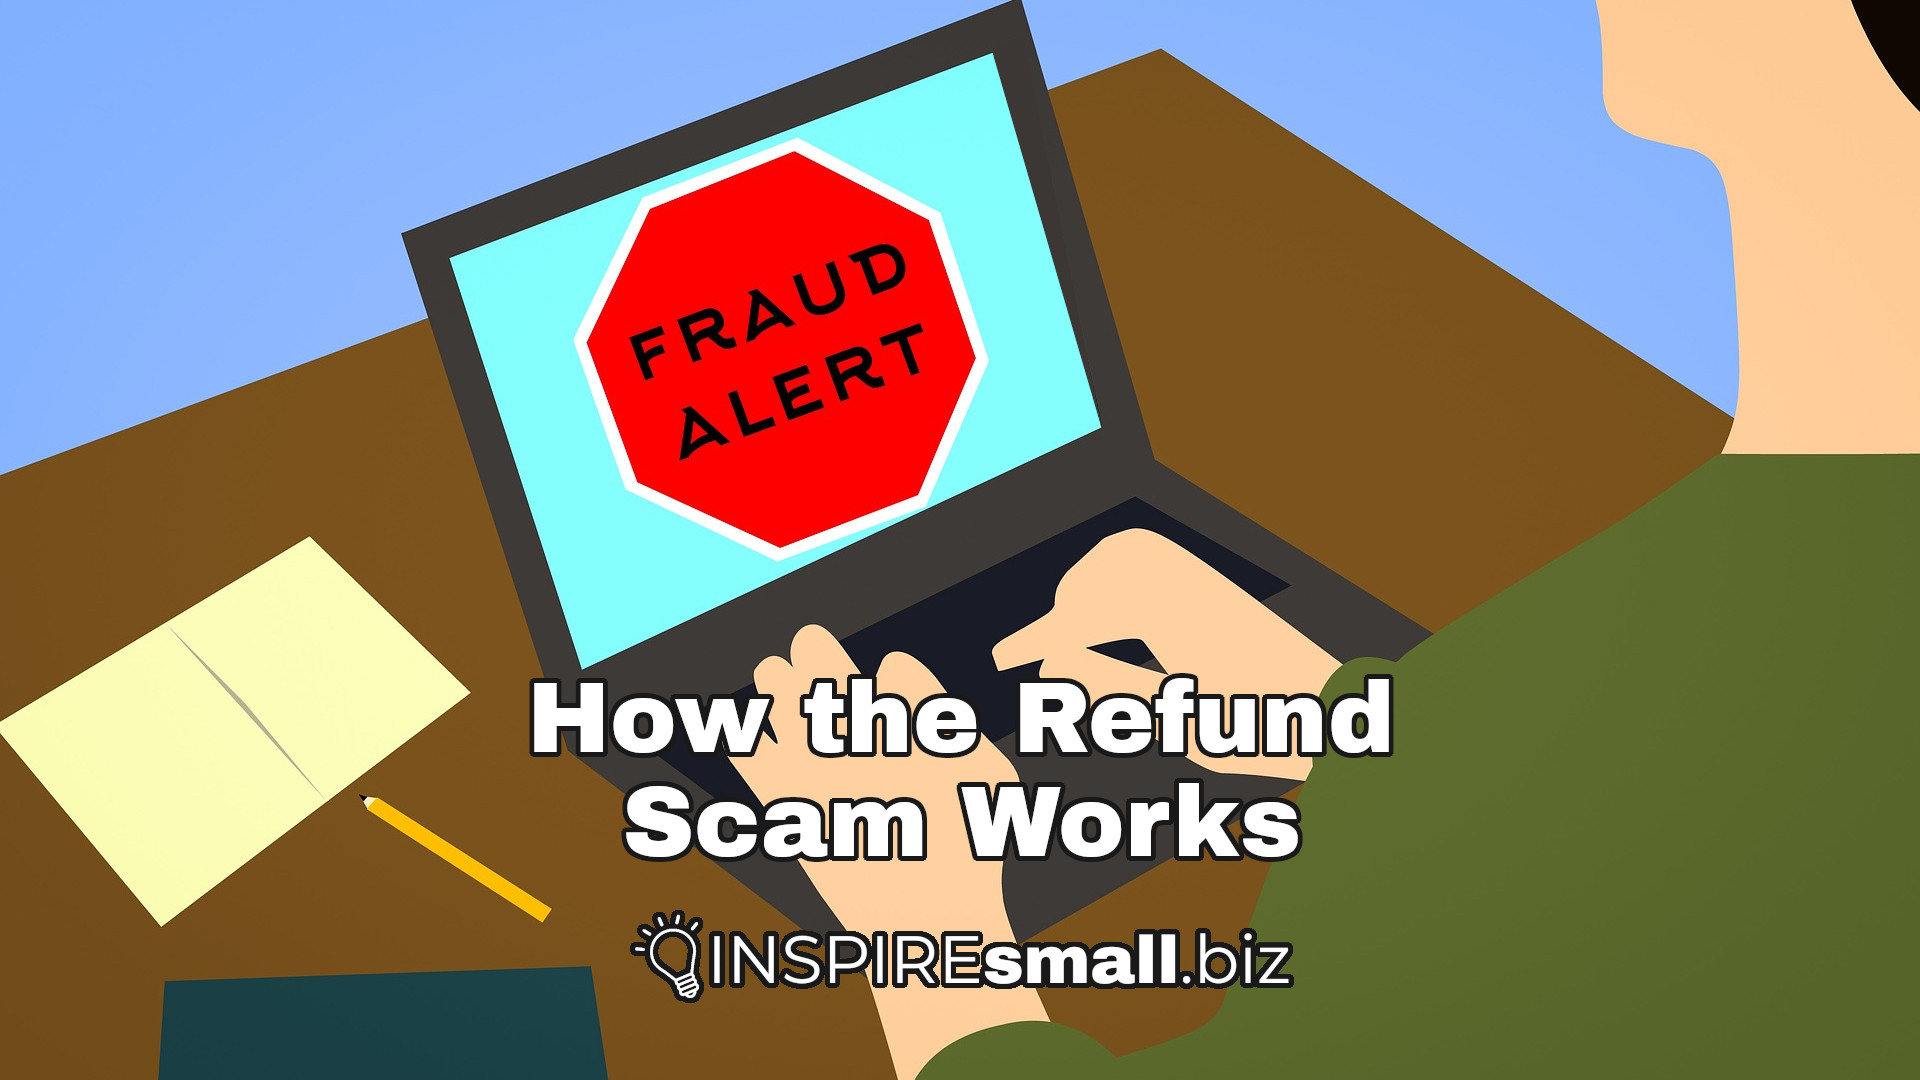 How the Refund Scam Works and How to Stop Them